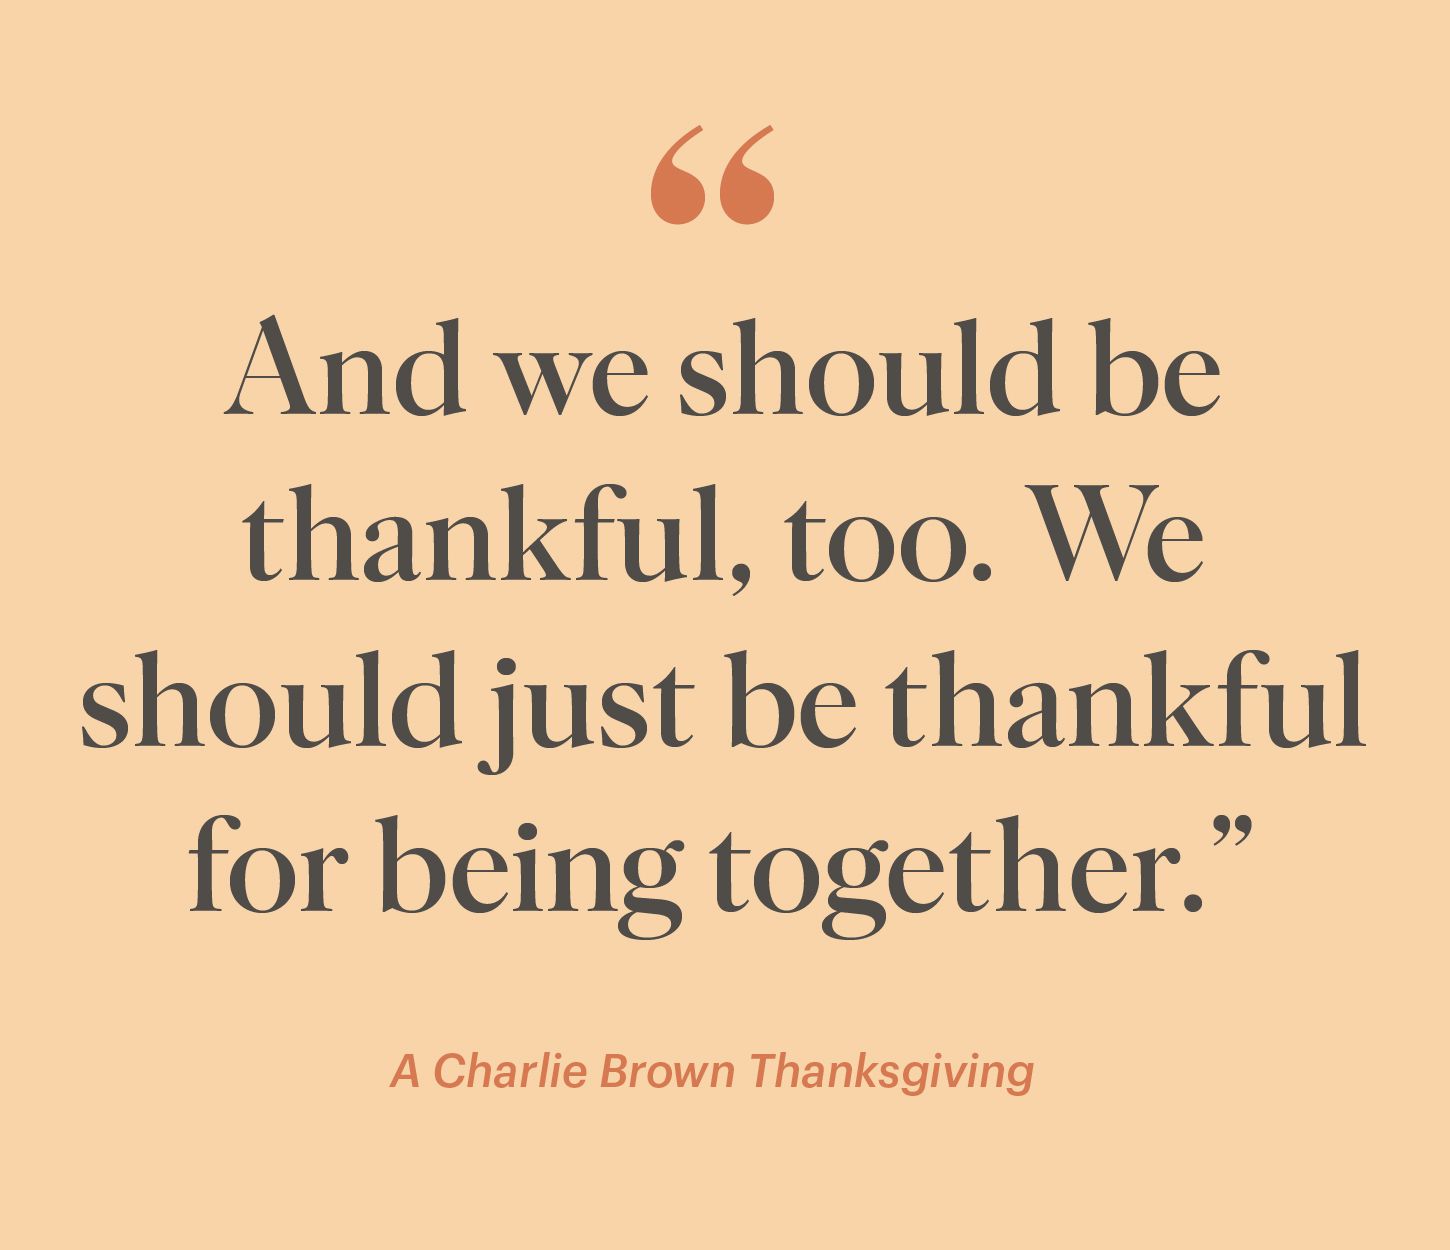 thanksgiving quote from a charlie brown thanksgiving